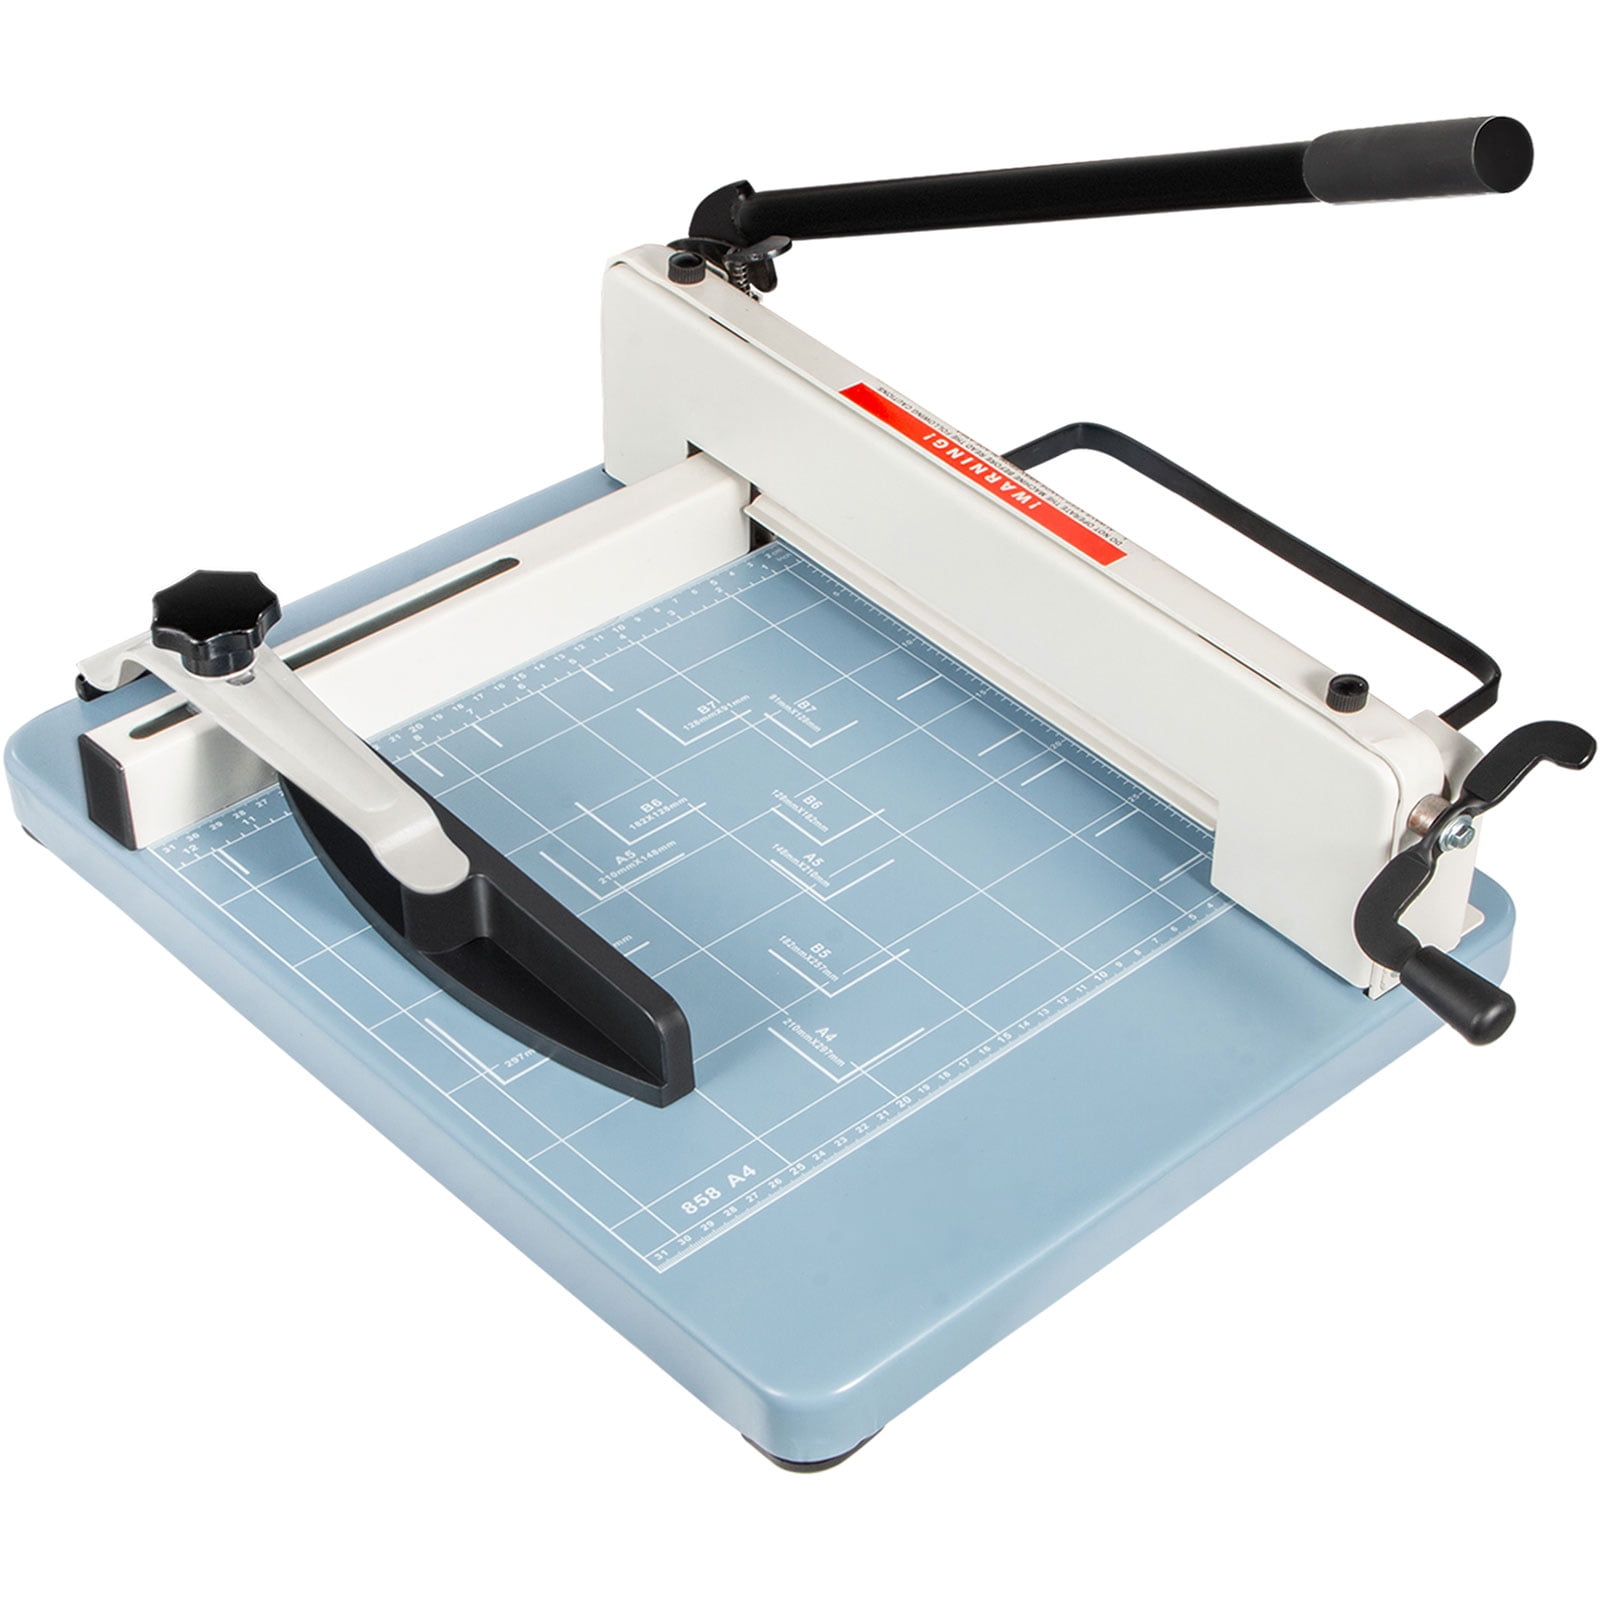 Fiskars Rotary Cutter and Ruler Combo - Square 12 x 12